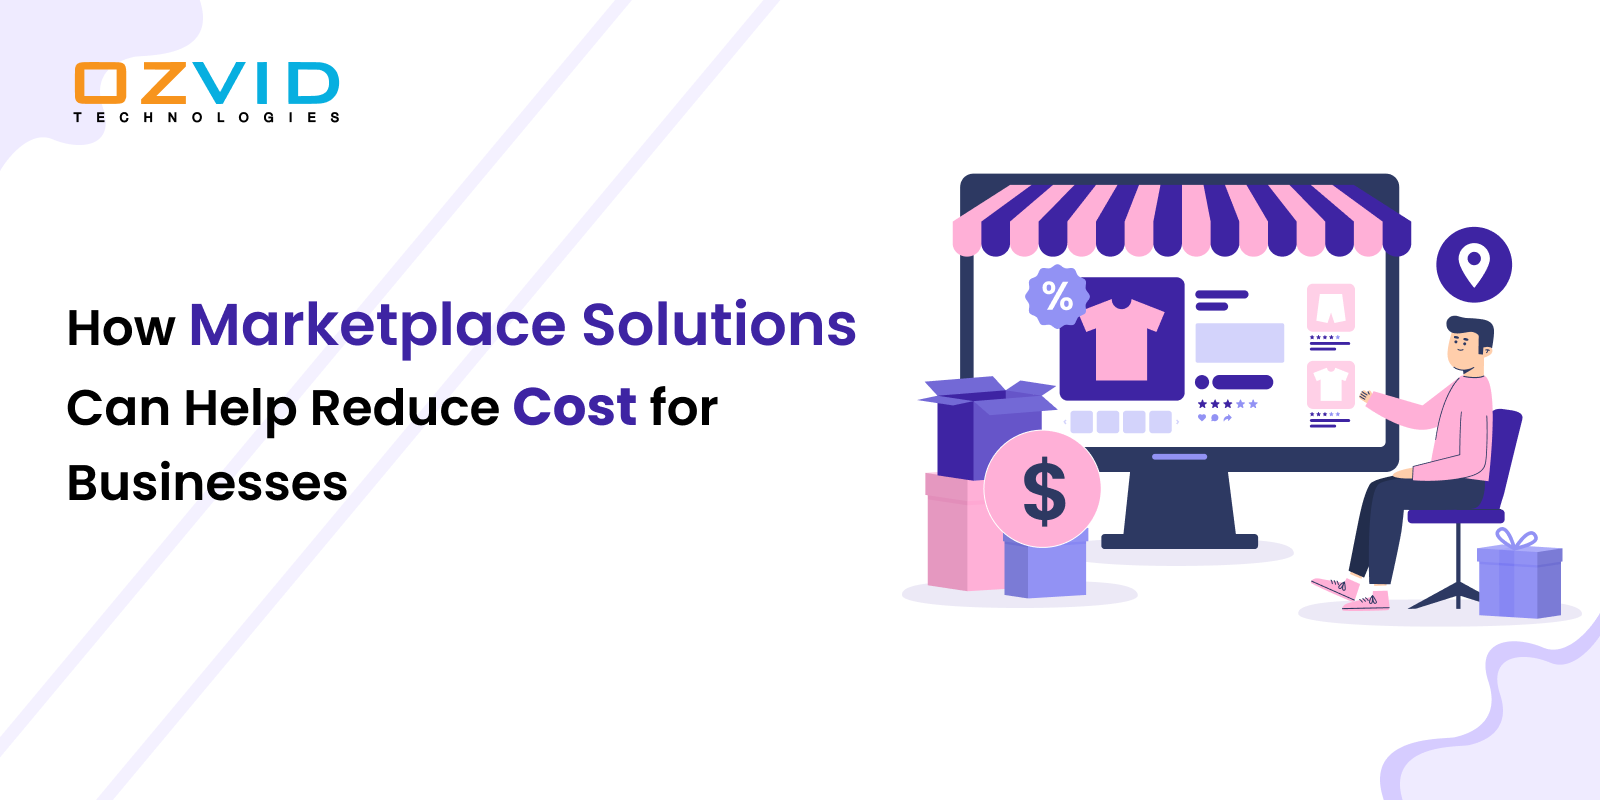 How Marketplace Solutions Can Help Reduce Cost for Businesses